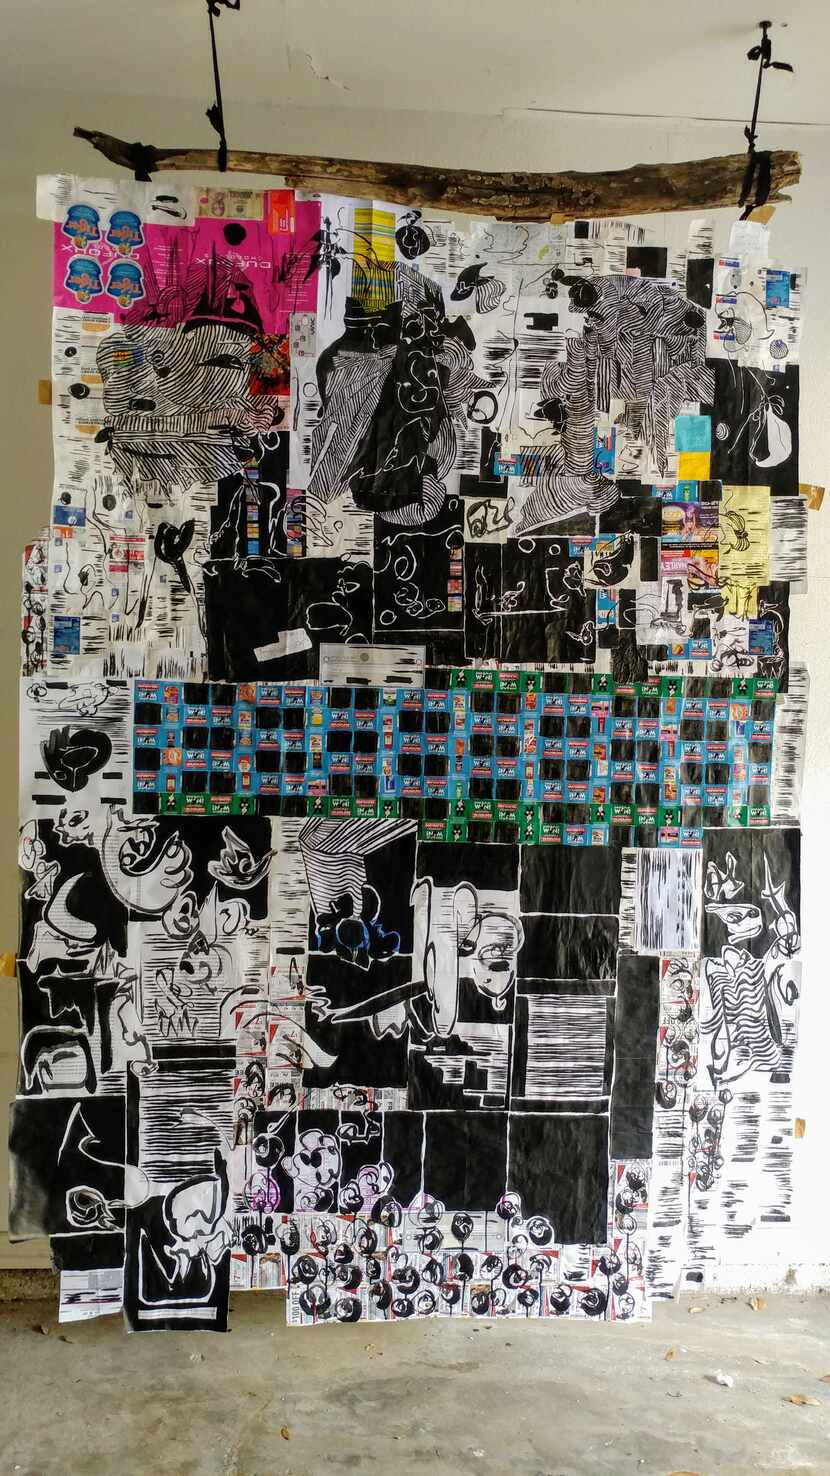 Xxavier Edward Carter's "Start Livin in the New World" 2020 collage "tapestry" is featured...